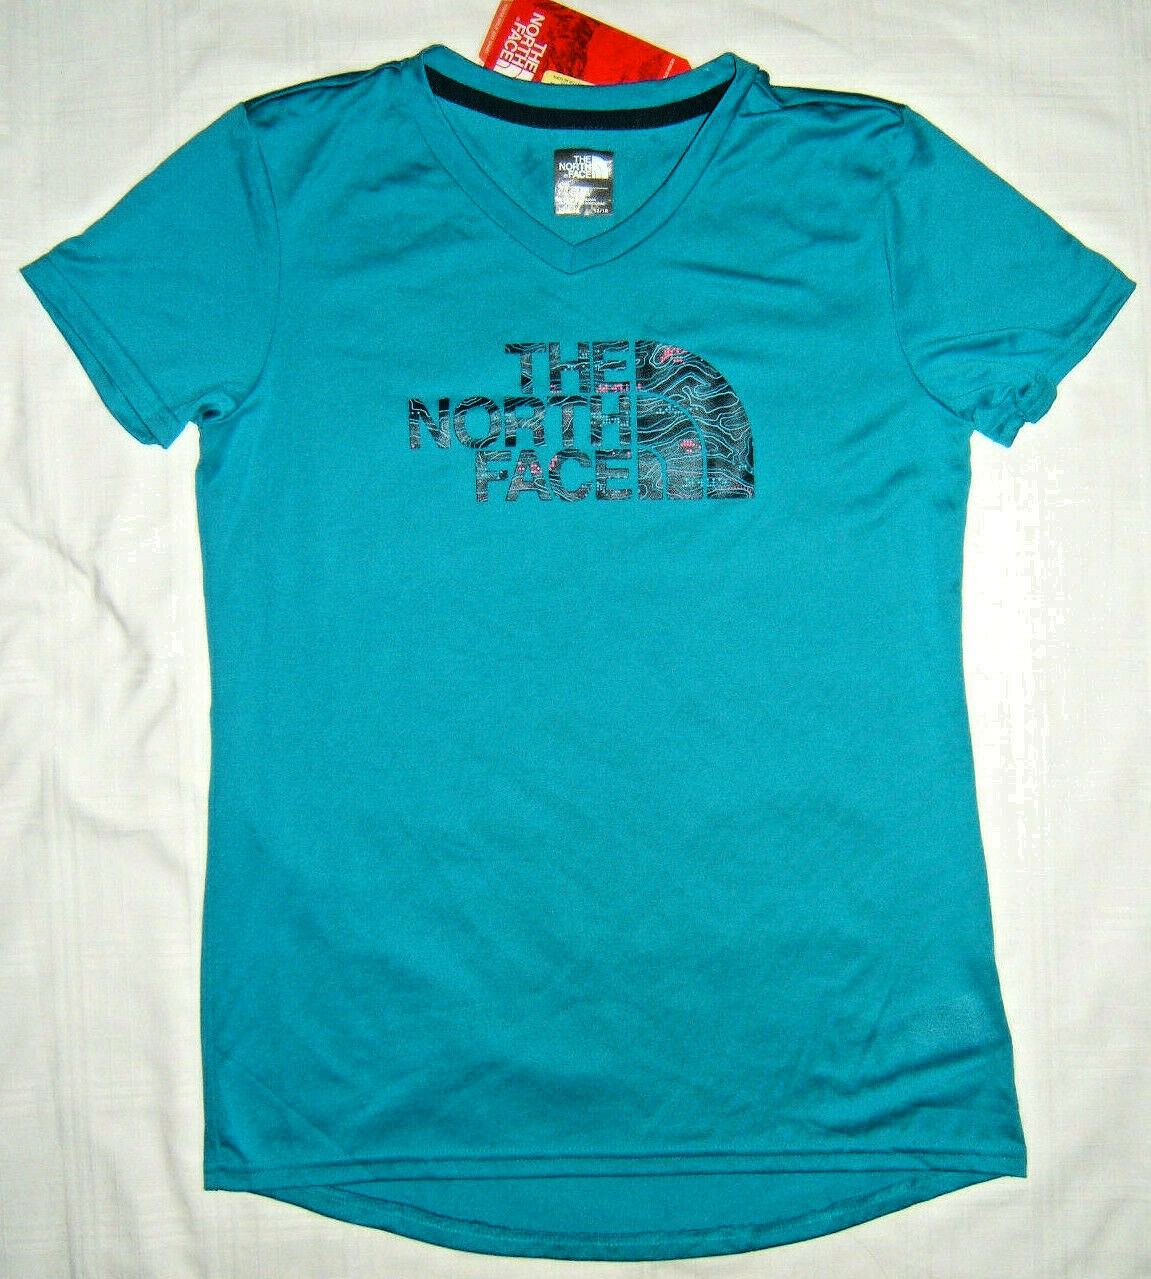 The North Face Girls SS Reaxion V-Neck Tee T-Shirt Teal Blue Size L 14-16 - $12.99